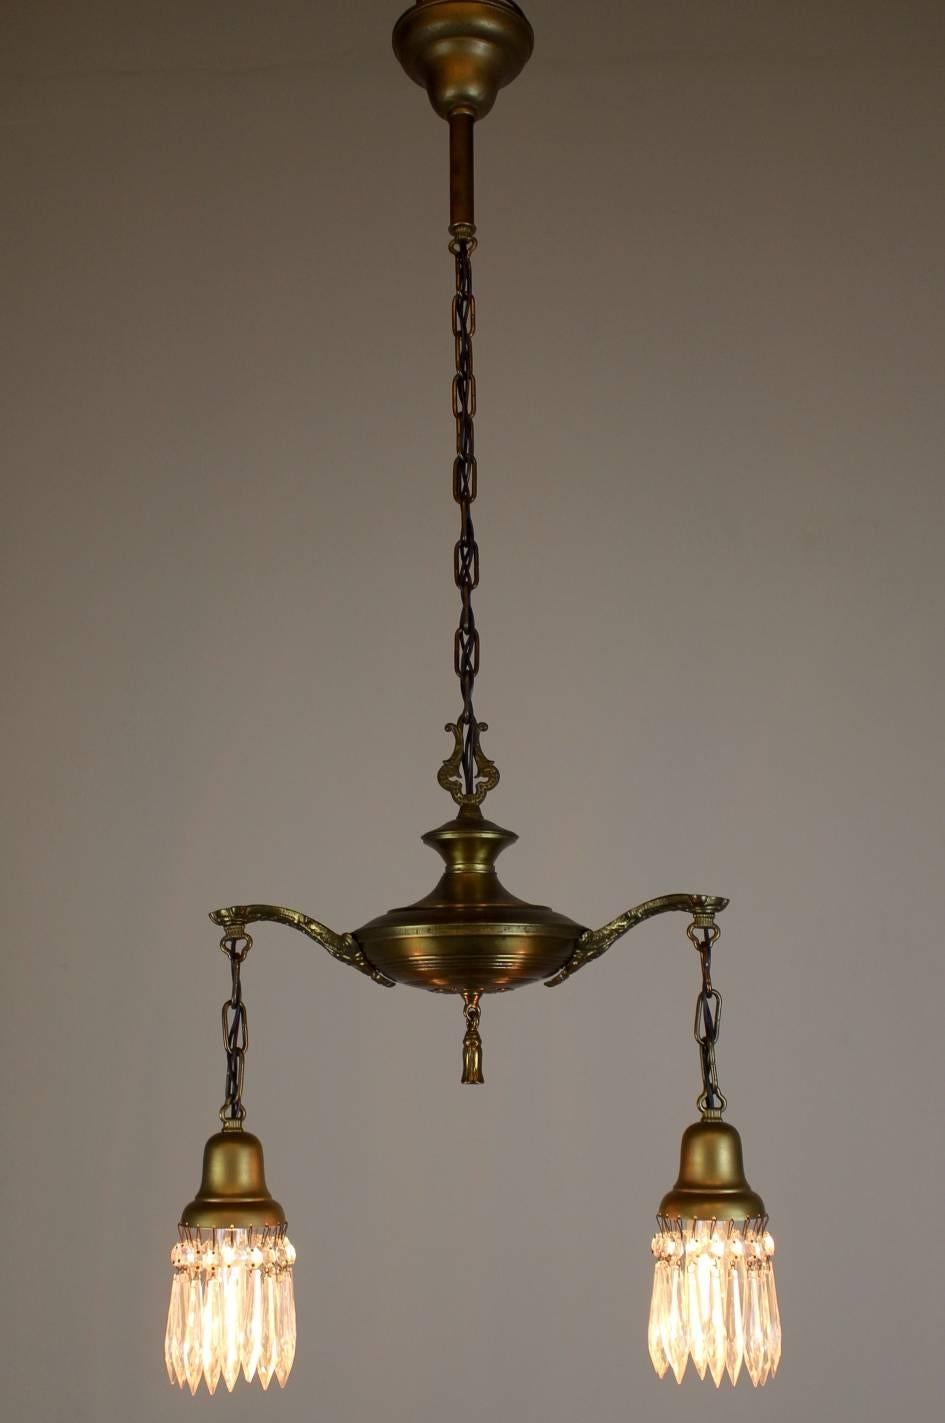 Charming little two-light pan fixture, in the Colonial Revival style.
Fitted with prisms and finished in lacquered old brass color, 
circa 1925
Measures: 41